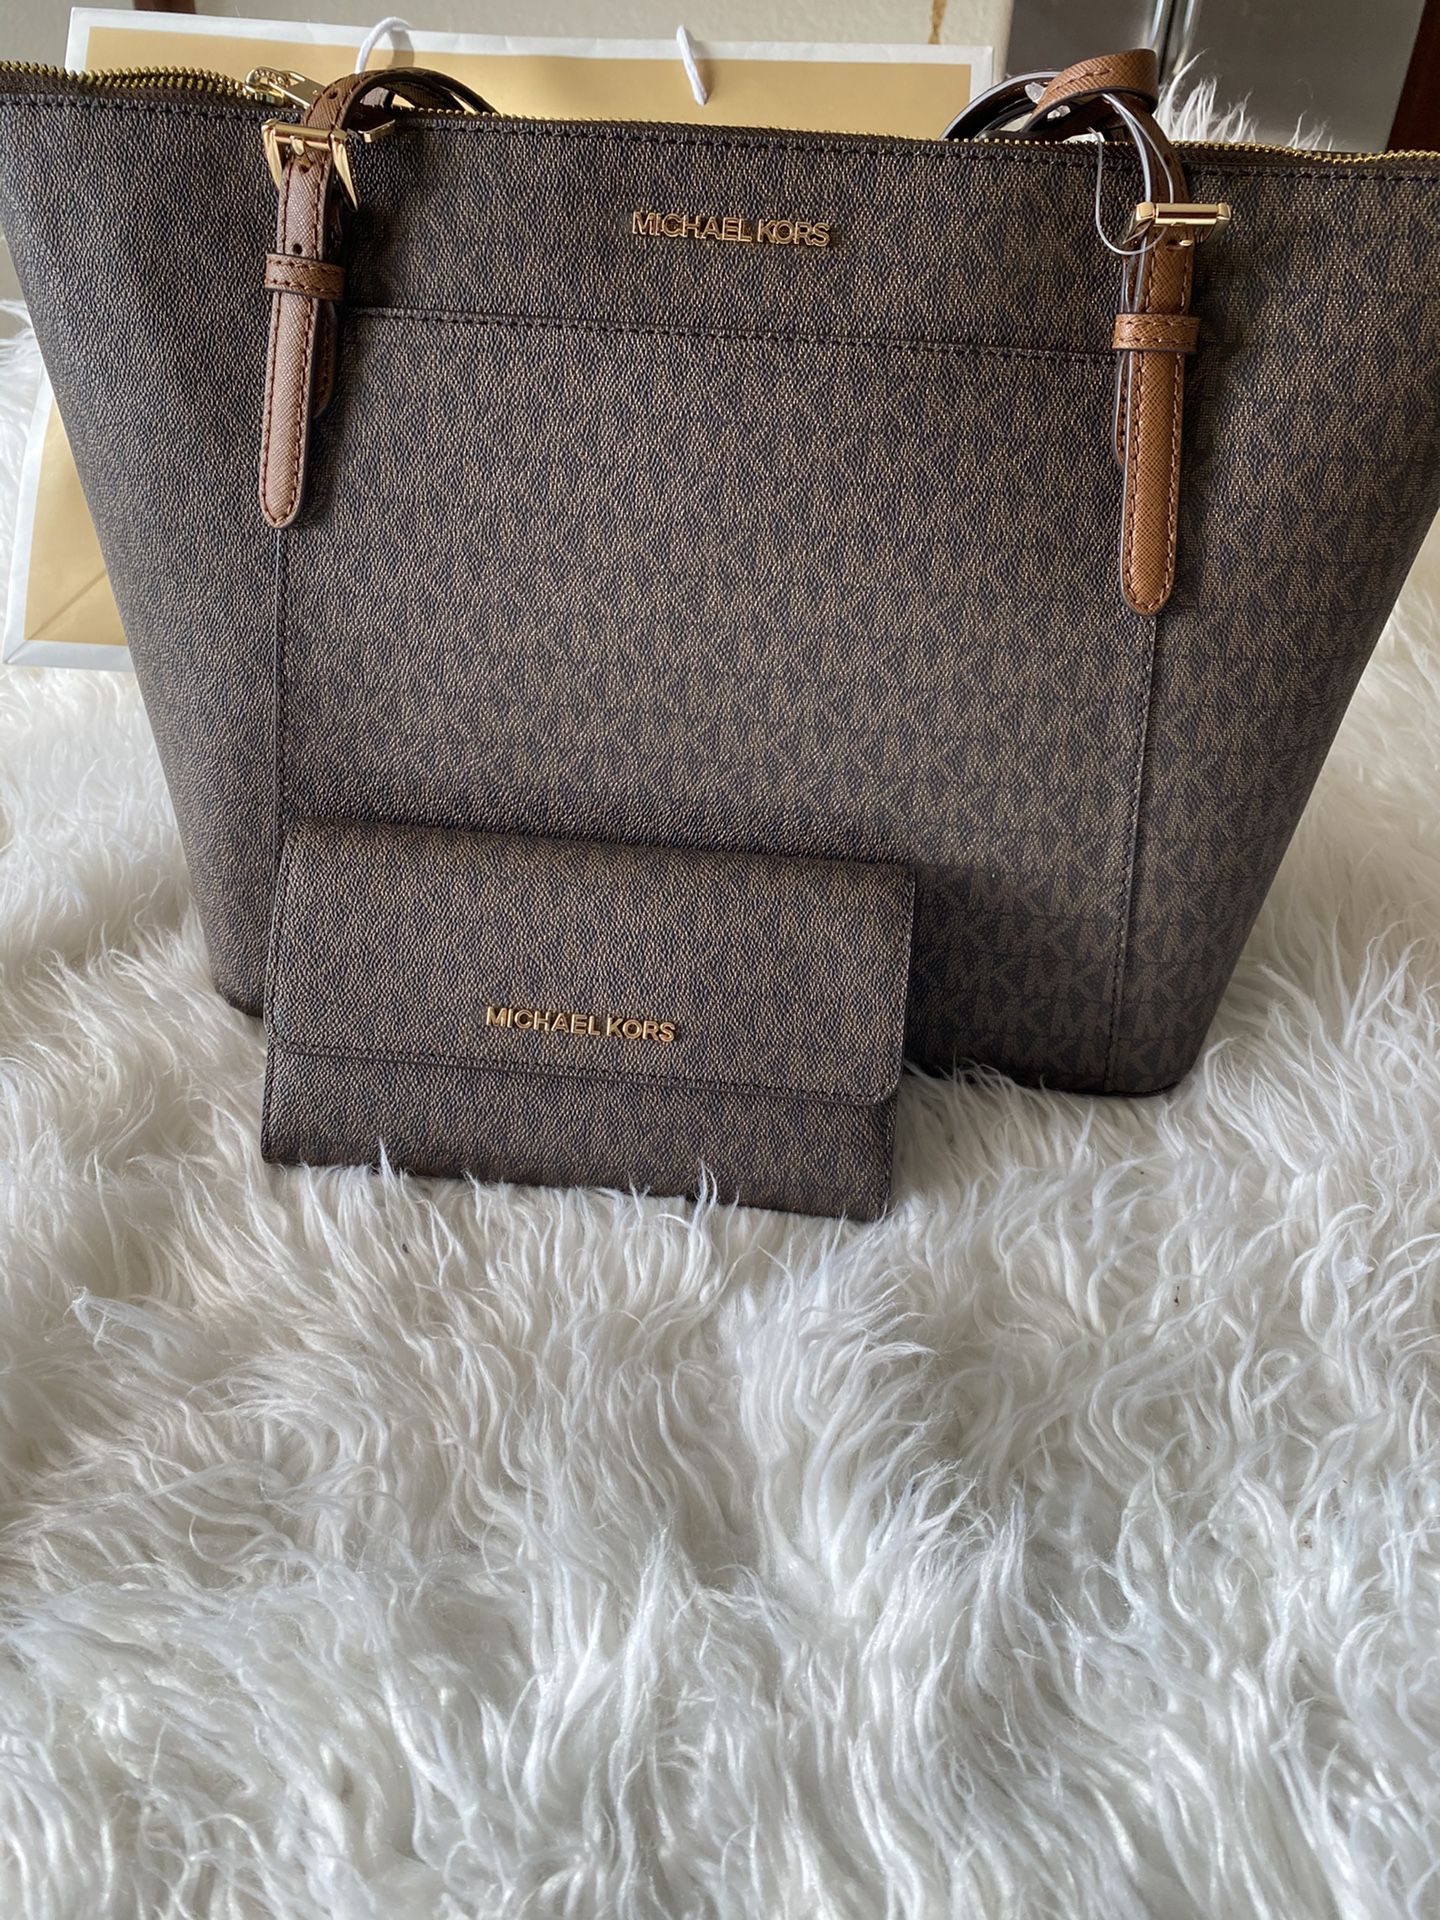 Michael Kors tote and wallet